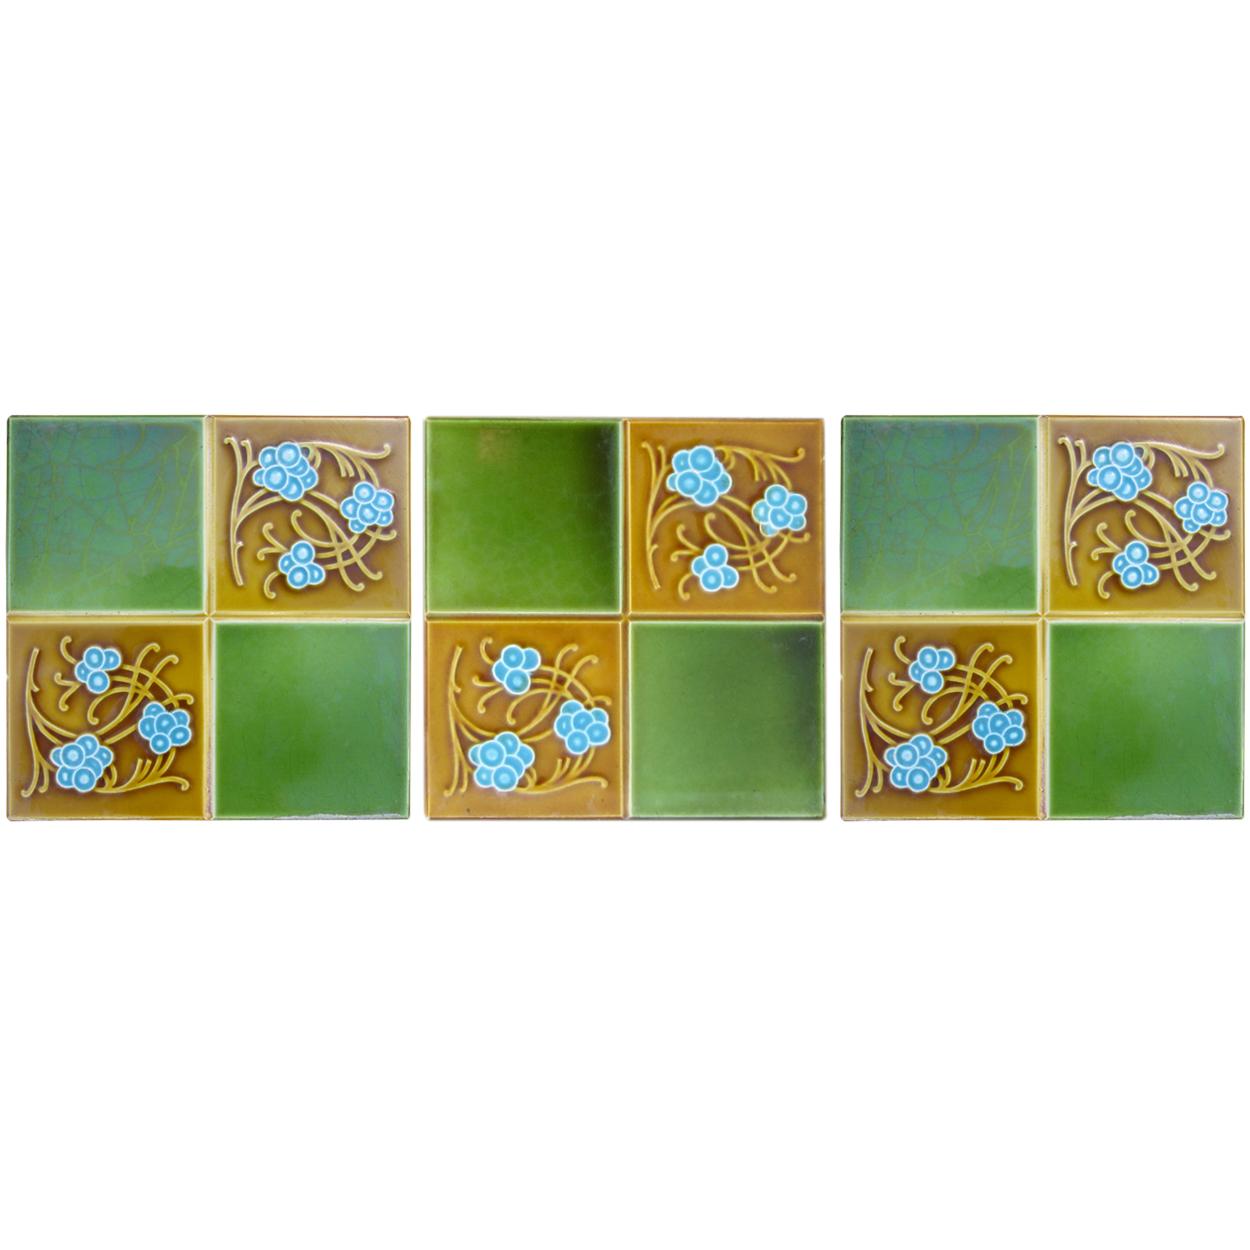 1 of the 40 amazing set handmade tiles in rich brown green and bright blue colors. Each tile is divided into four faces. Manufactured around 1920 by Gilliot Frères, Hemiksem, Belgium.
These tiles would be charming displayed on easels, framed or